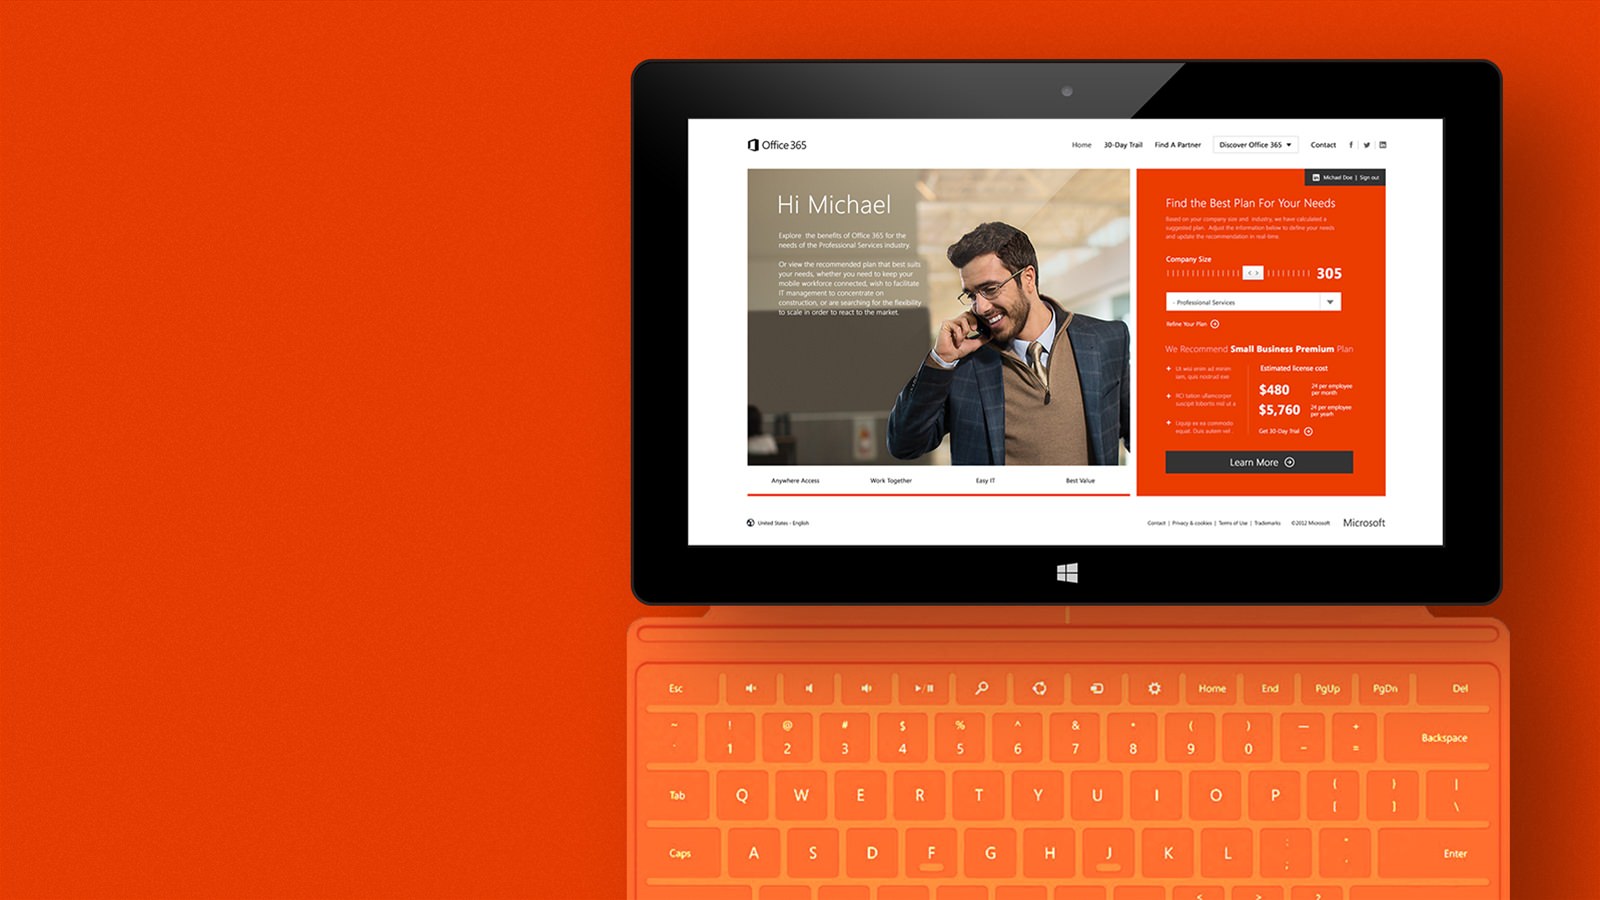 Download Microsoft Office 365 With 30-Days Trial And Free Office Live Online